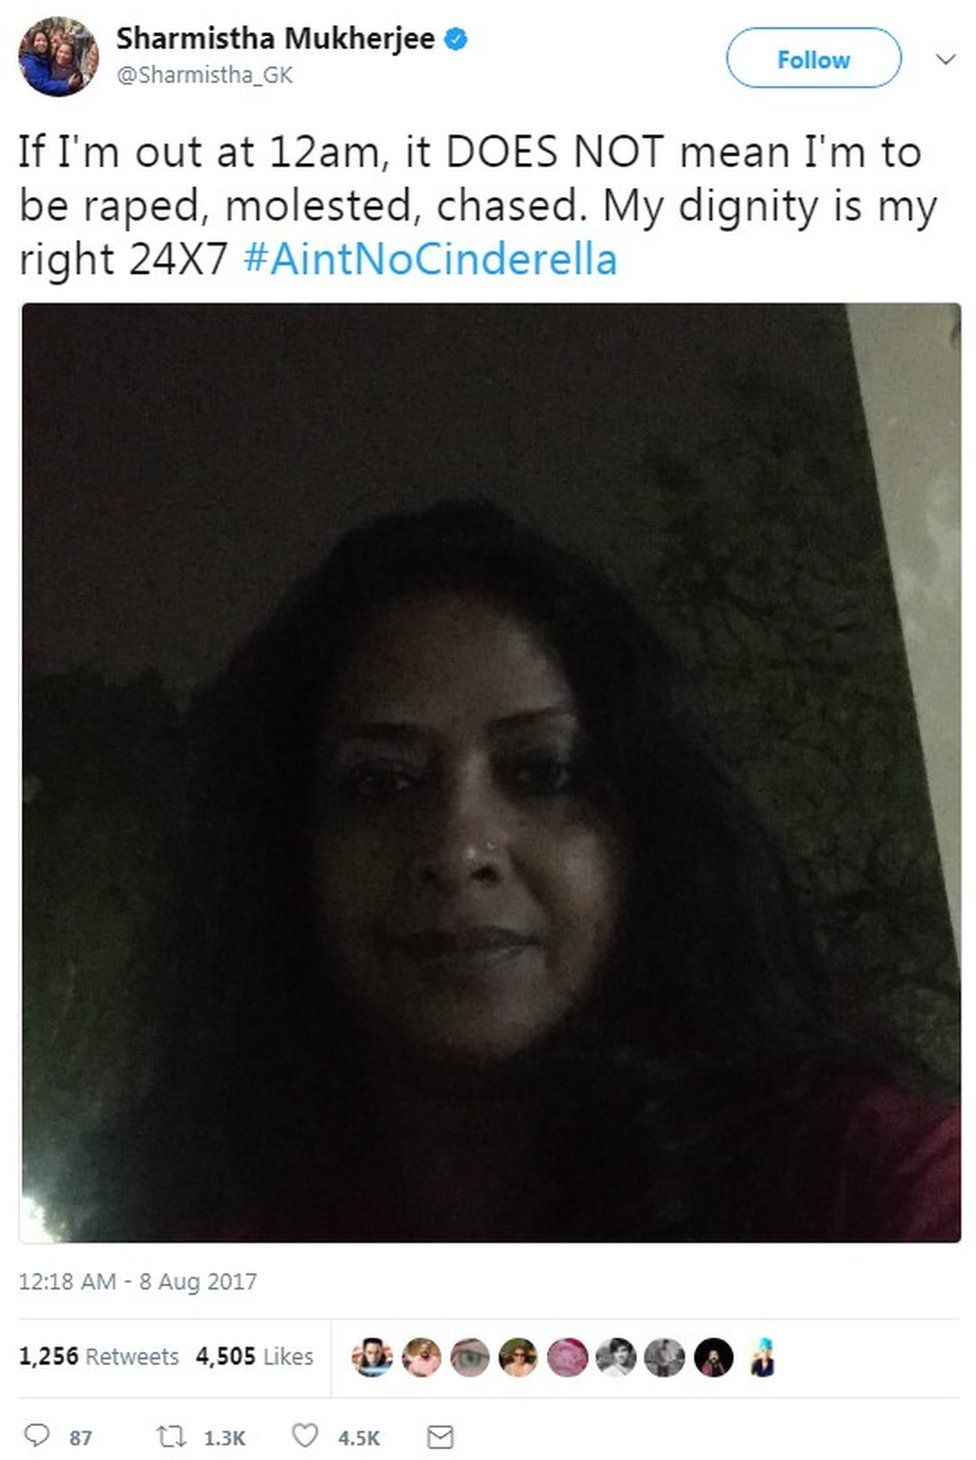 If I'm out at 12am, it DOES NOT mean I'm to be raped, molested, chased. My dignity is my right 24X7 #AintNoCinderella